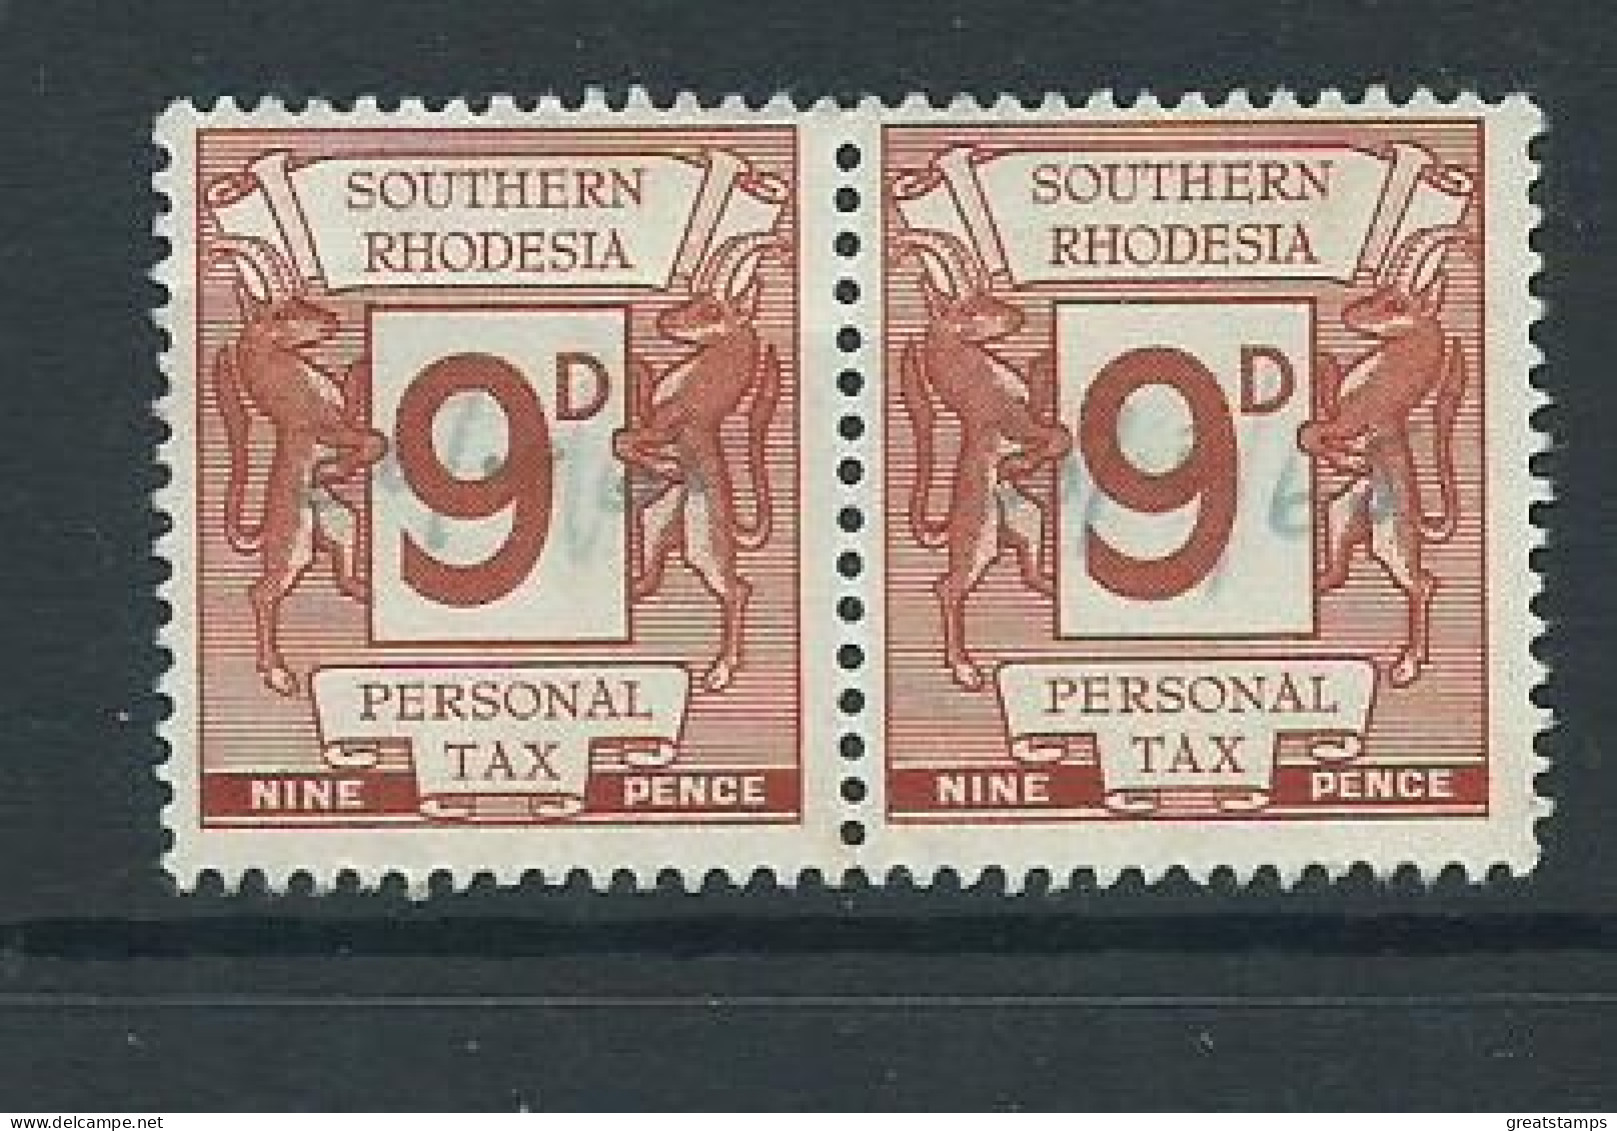 Southern Rhodesia 1940s Personal Tax Revenue Stamps Used 9d Pair - Southern Rhodesia (...-1964)